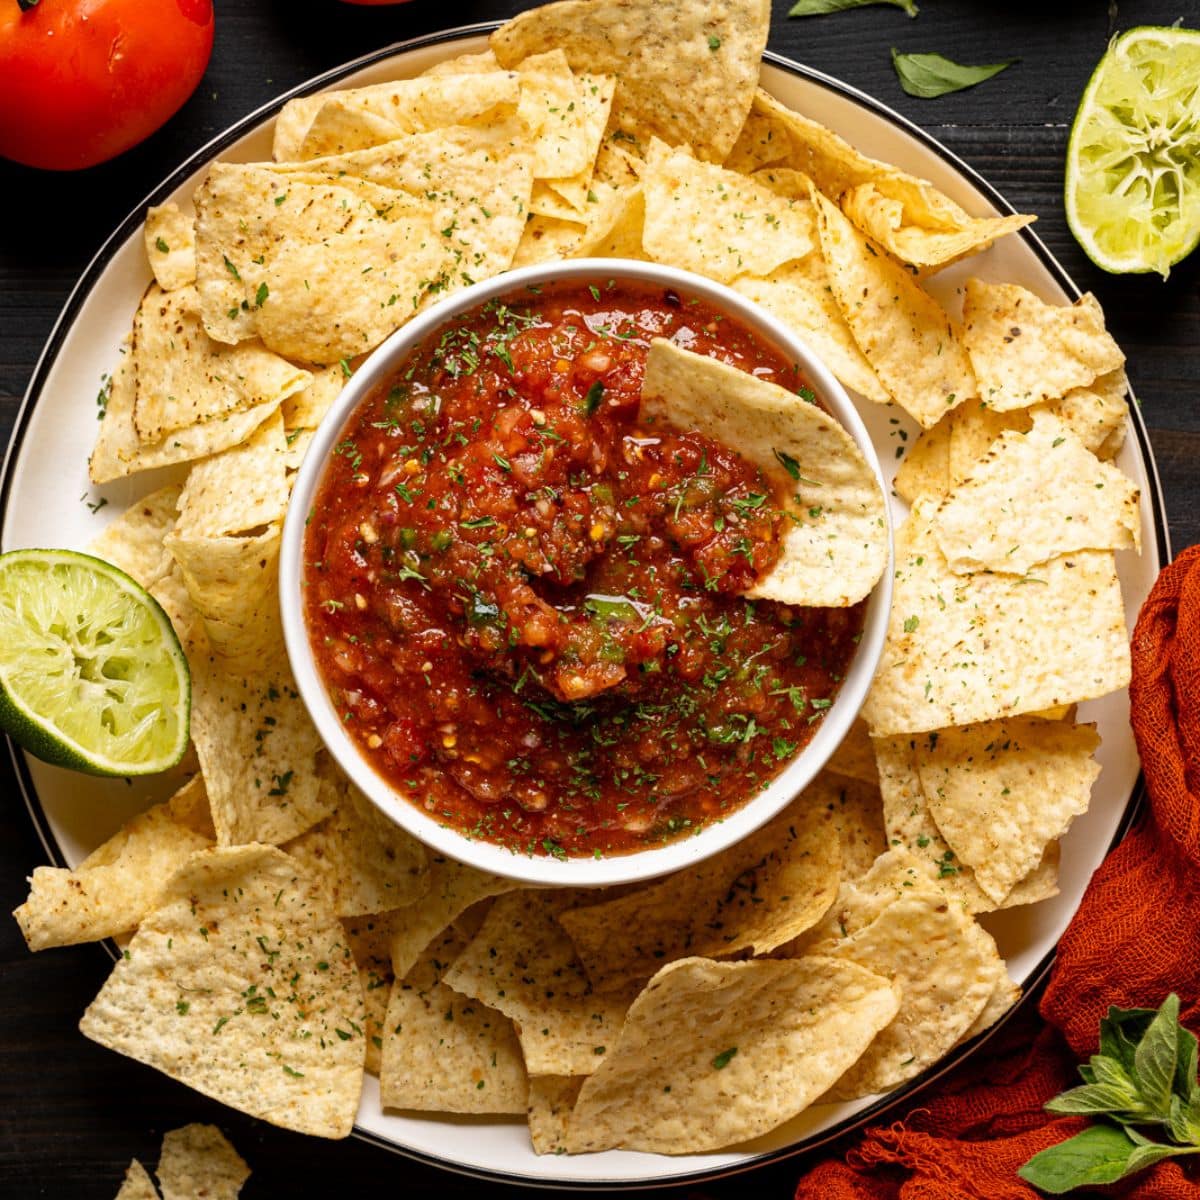 Salsa and chips with tomatoes, lime, and garnish.